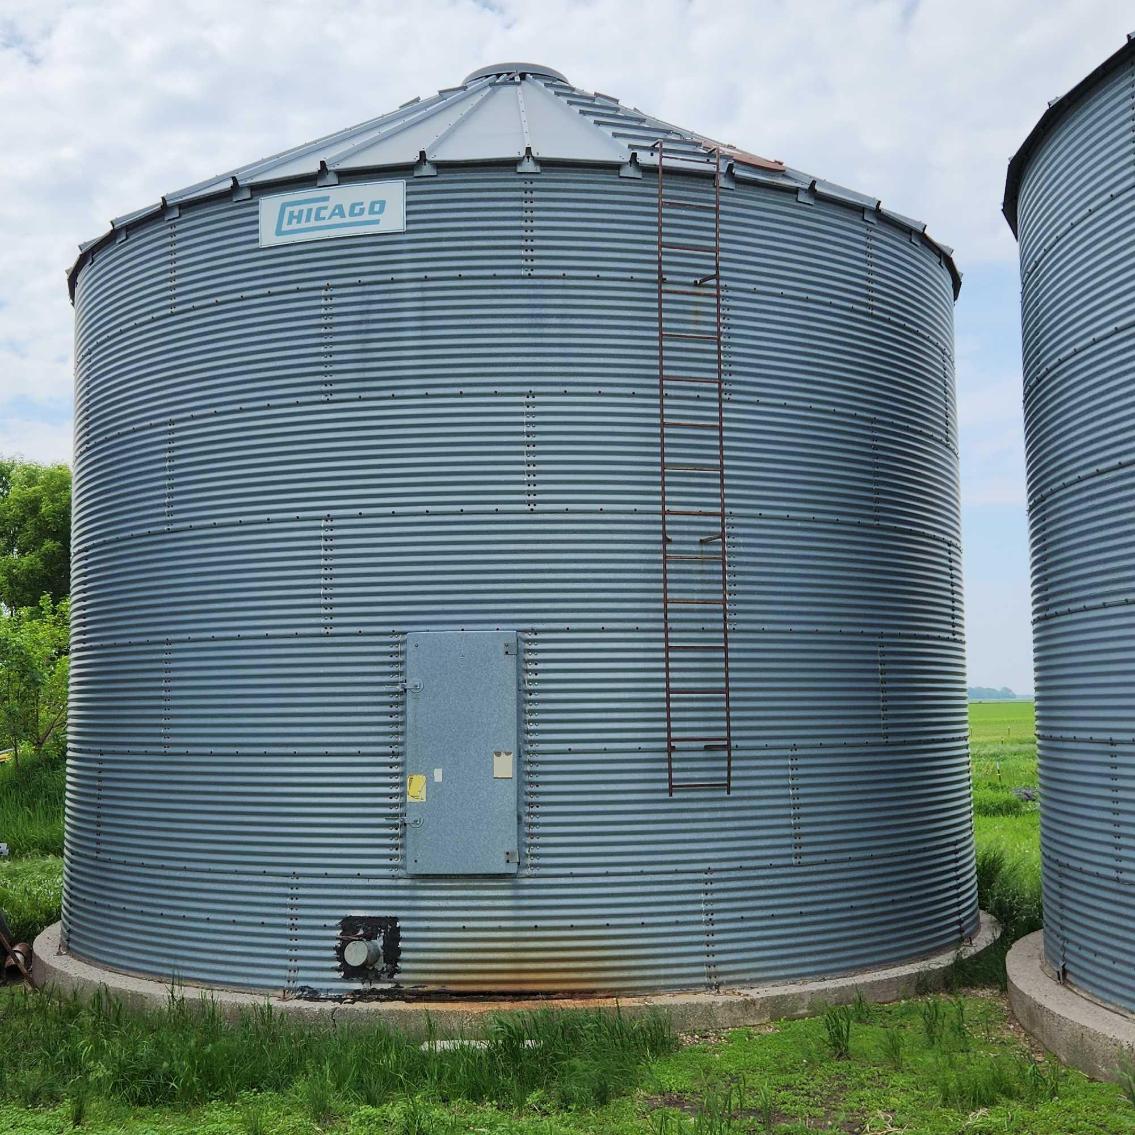 Pole Building & Grain Bins to be Moved